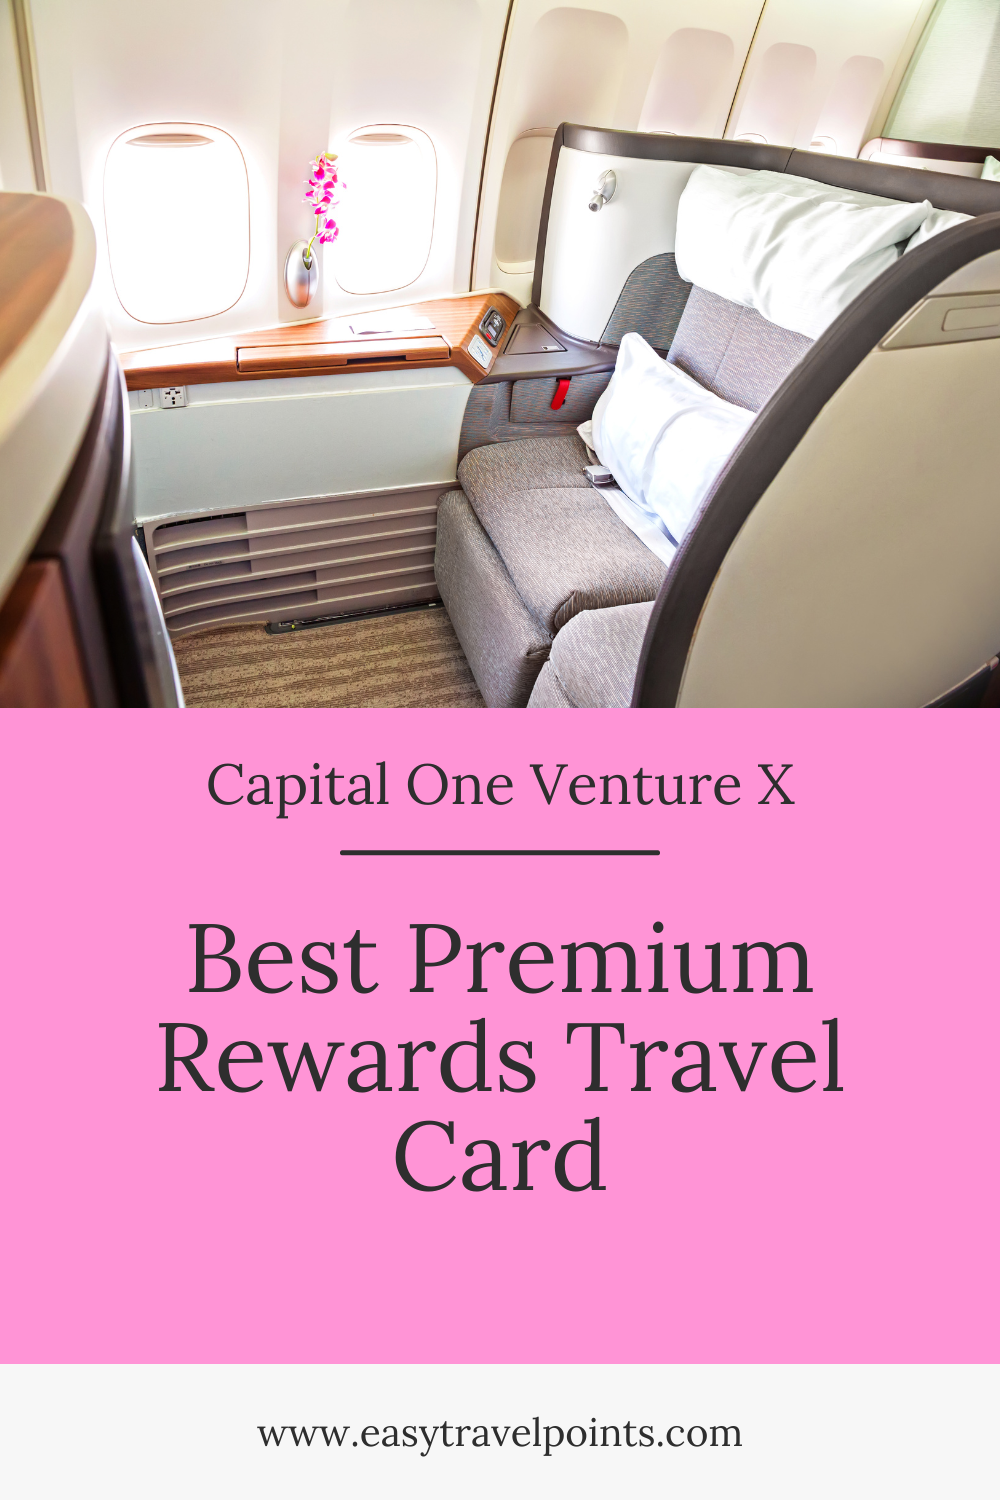 The Capital One Venture X credit card is one of my favorite travel rewards cards. This card comes with several great benefits, the points are easy to redeem and the annual fee is very reasonable. This is why the card is one of my favorites to recommend to most people.